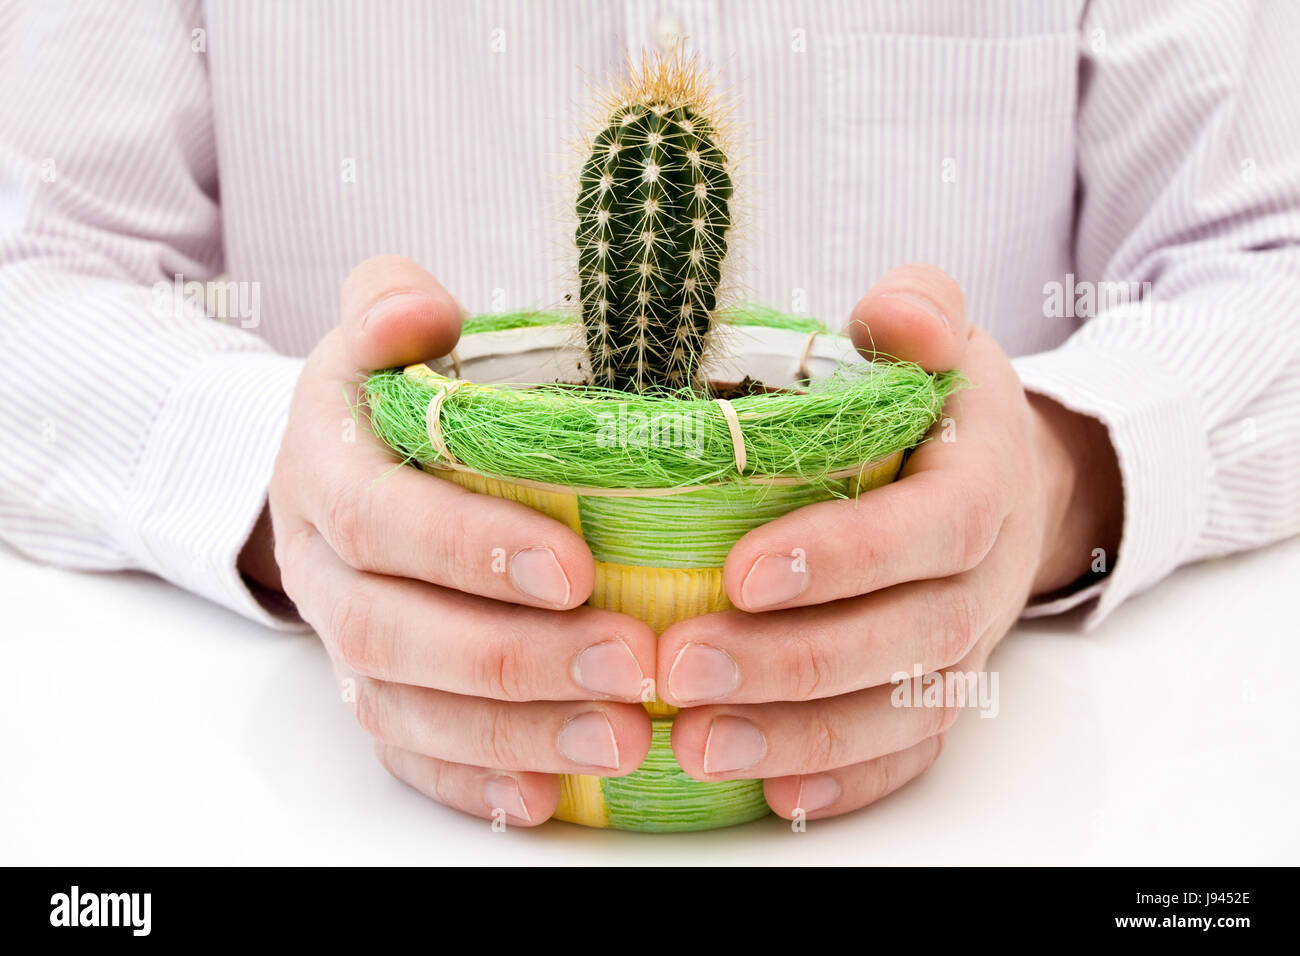 hand, hands, protect, protection, cactus, ecology, floral, plant, nature, care, Stock Photo